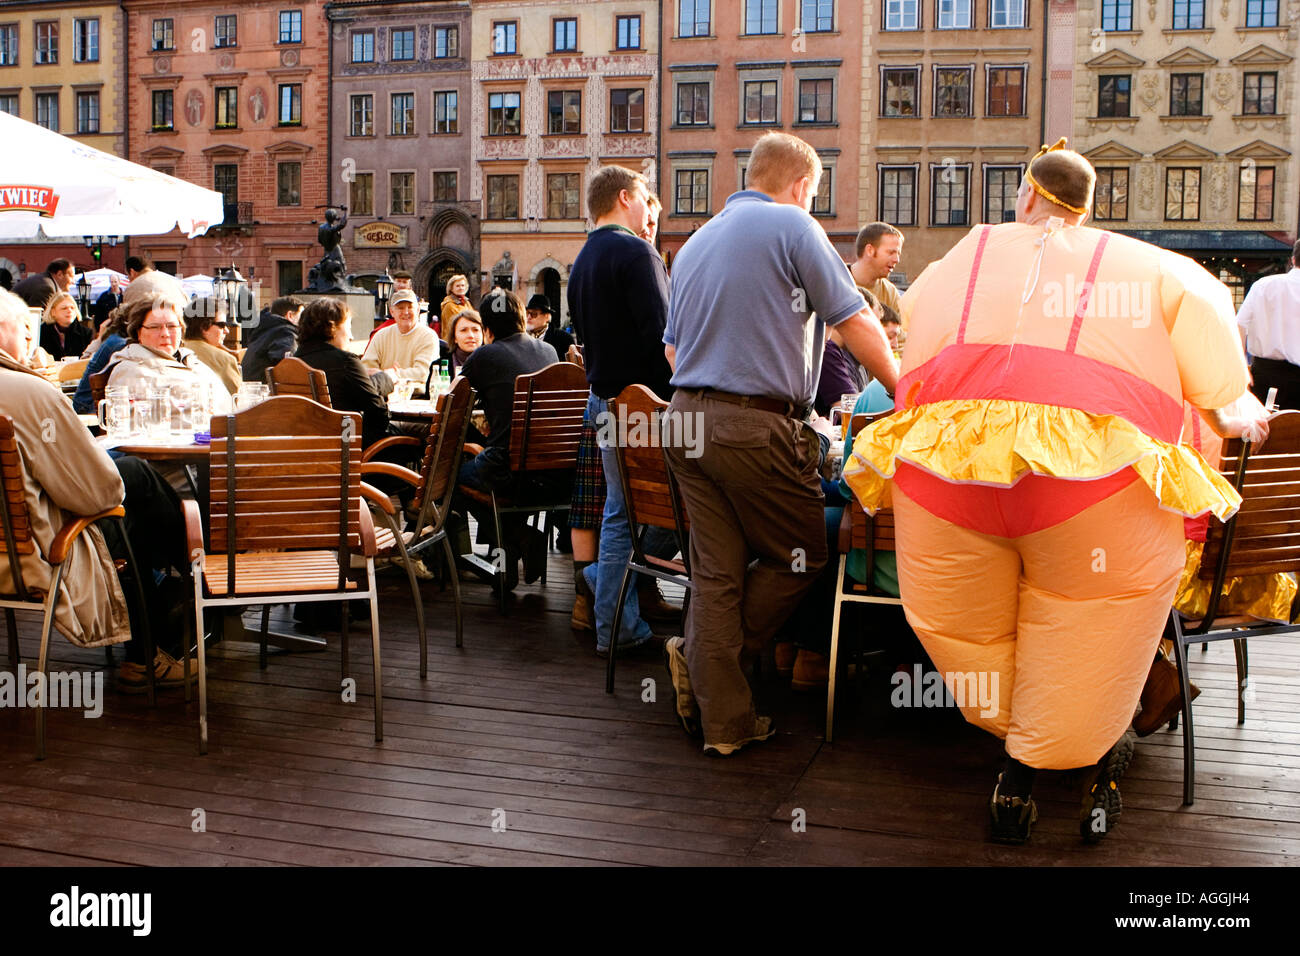 Guy in an inflatable outfit enjoying a Stag weekend in the Old Market Square Warsaw Stock Photo